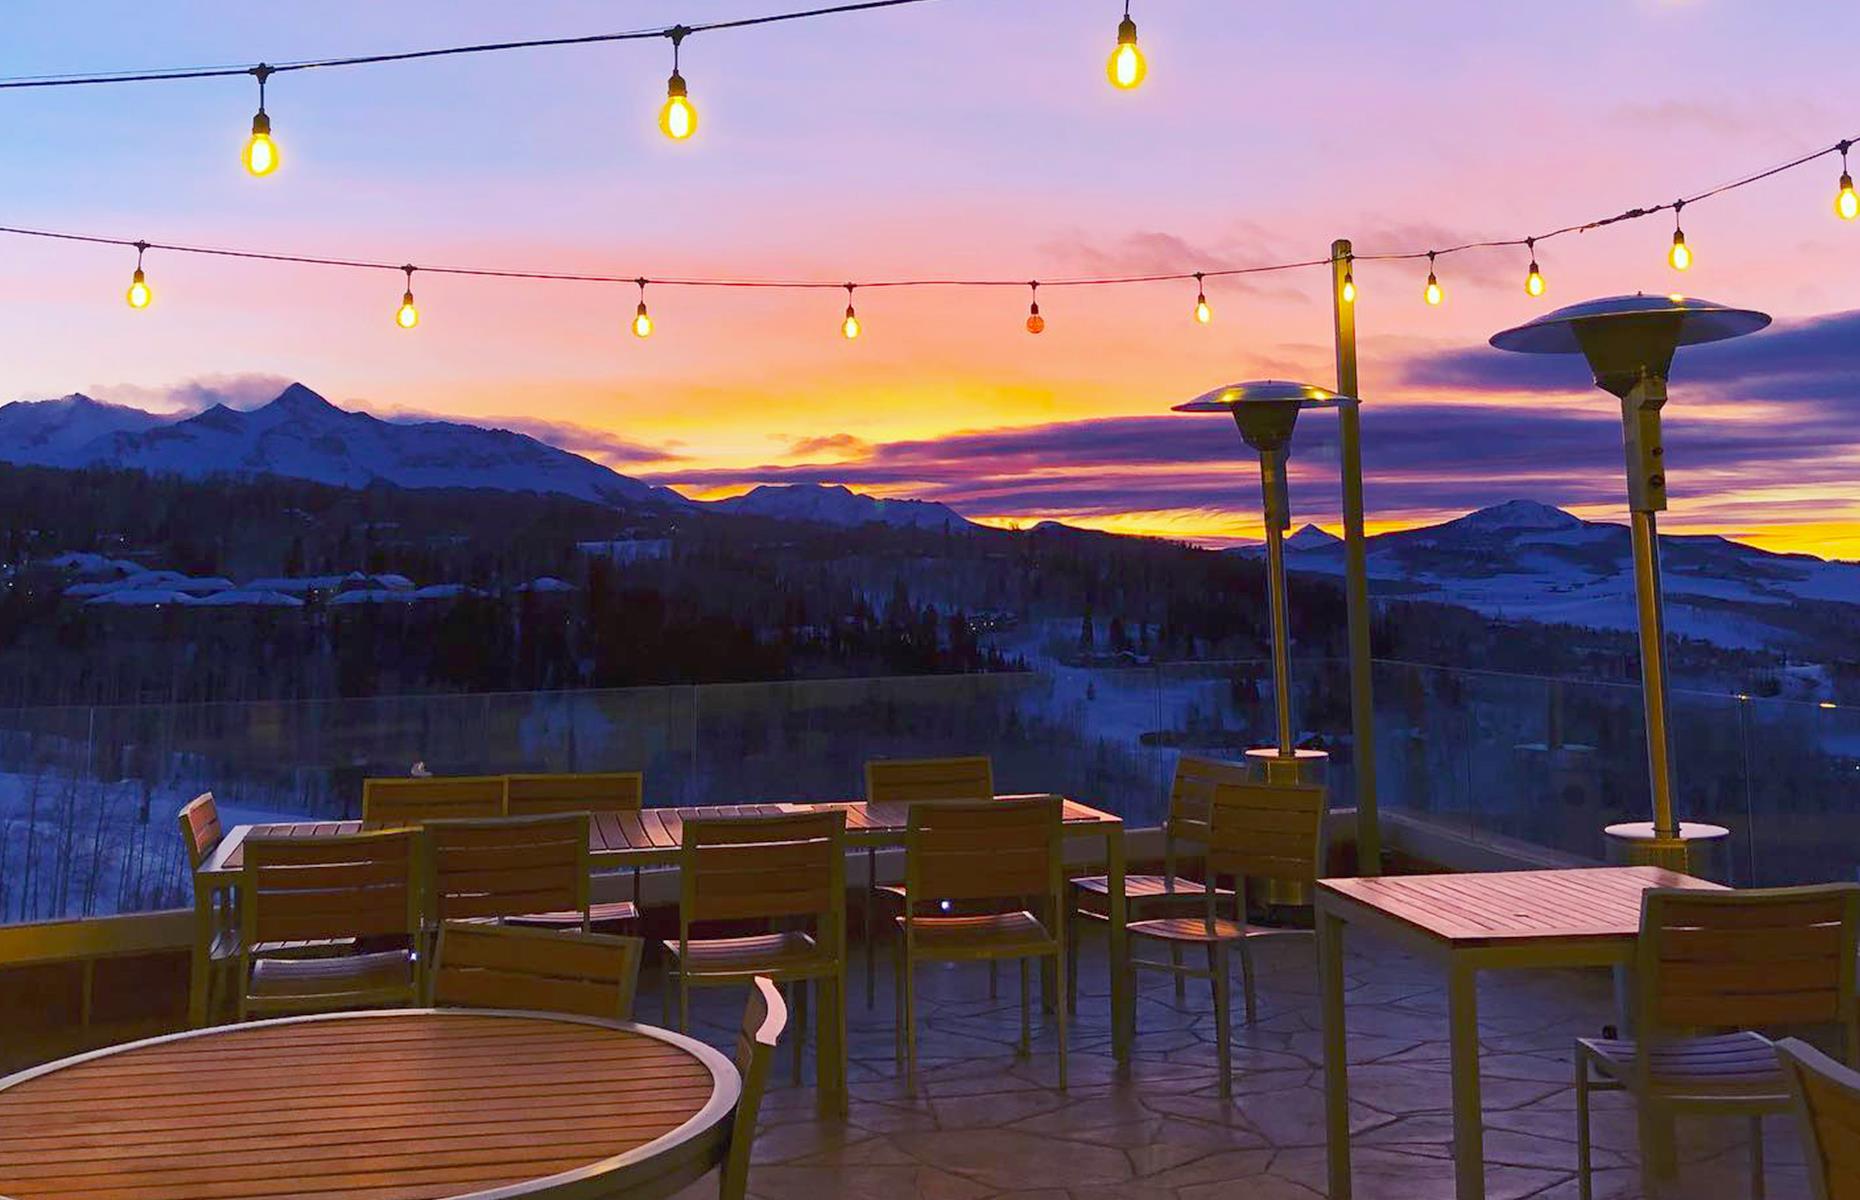 The Best Outdoor Restaurant In Every State Revealed